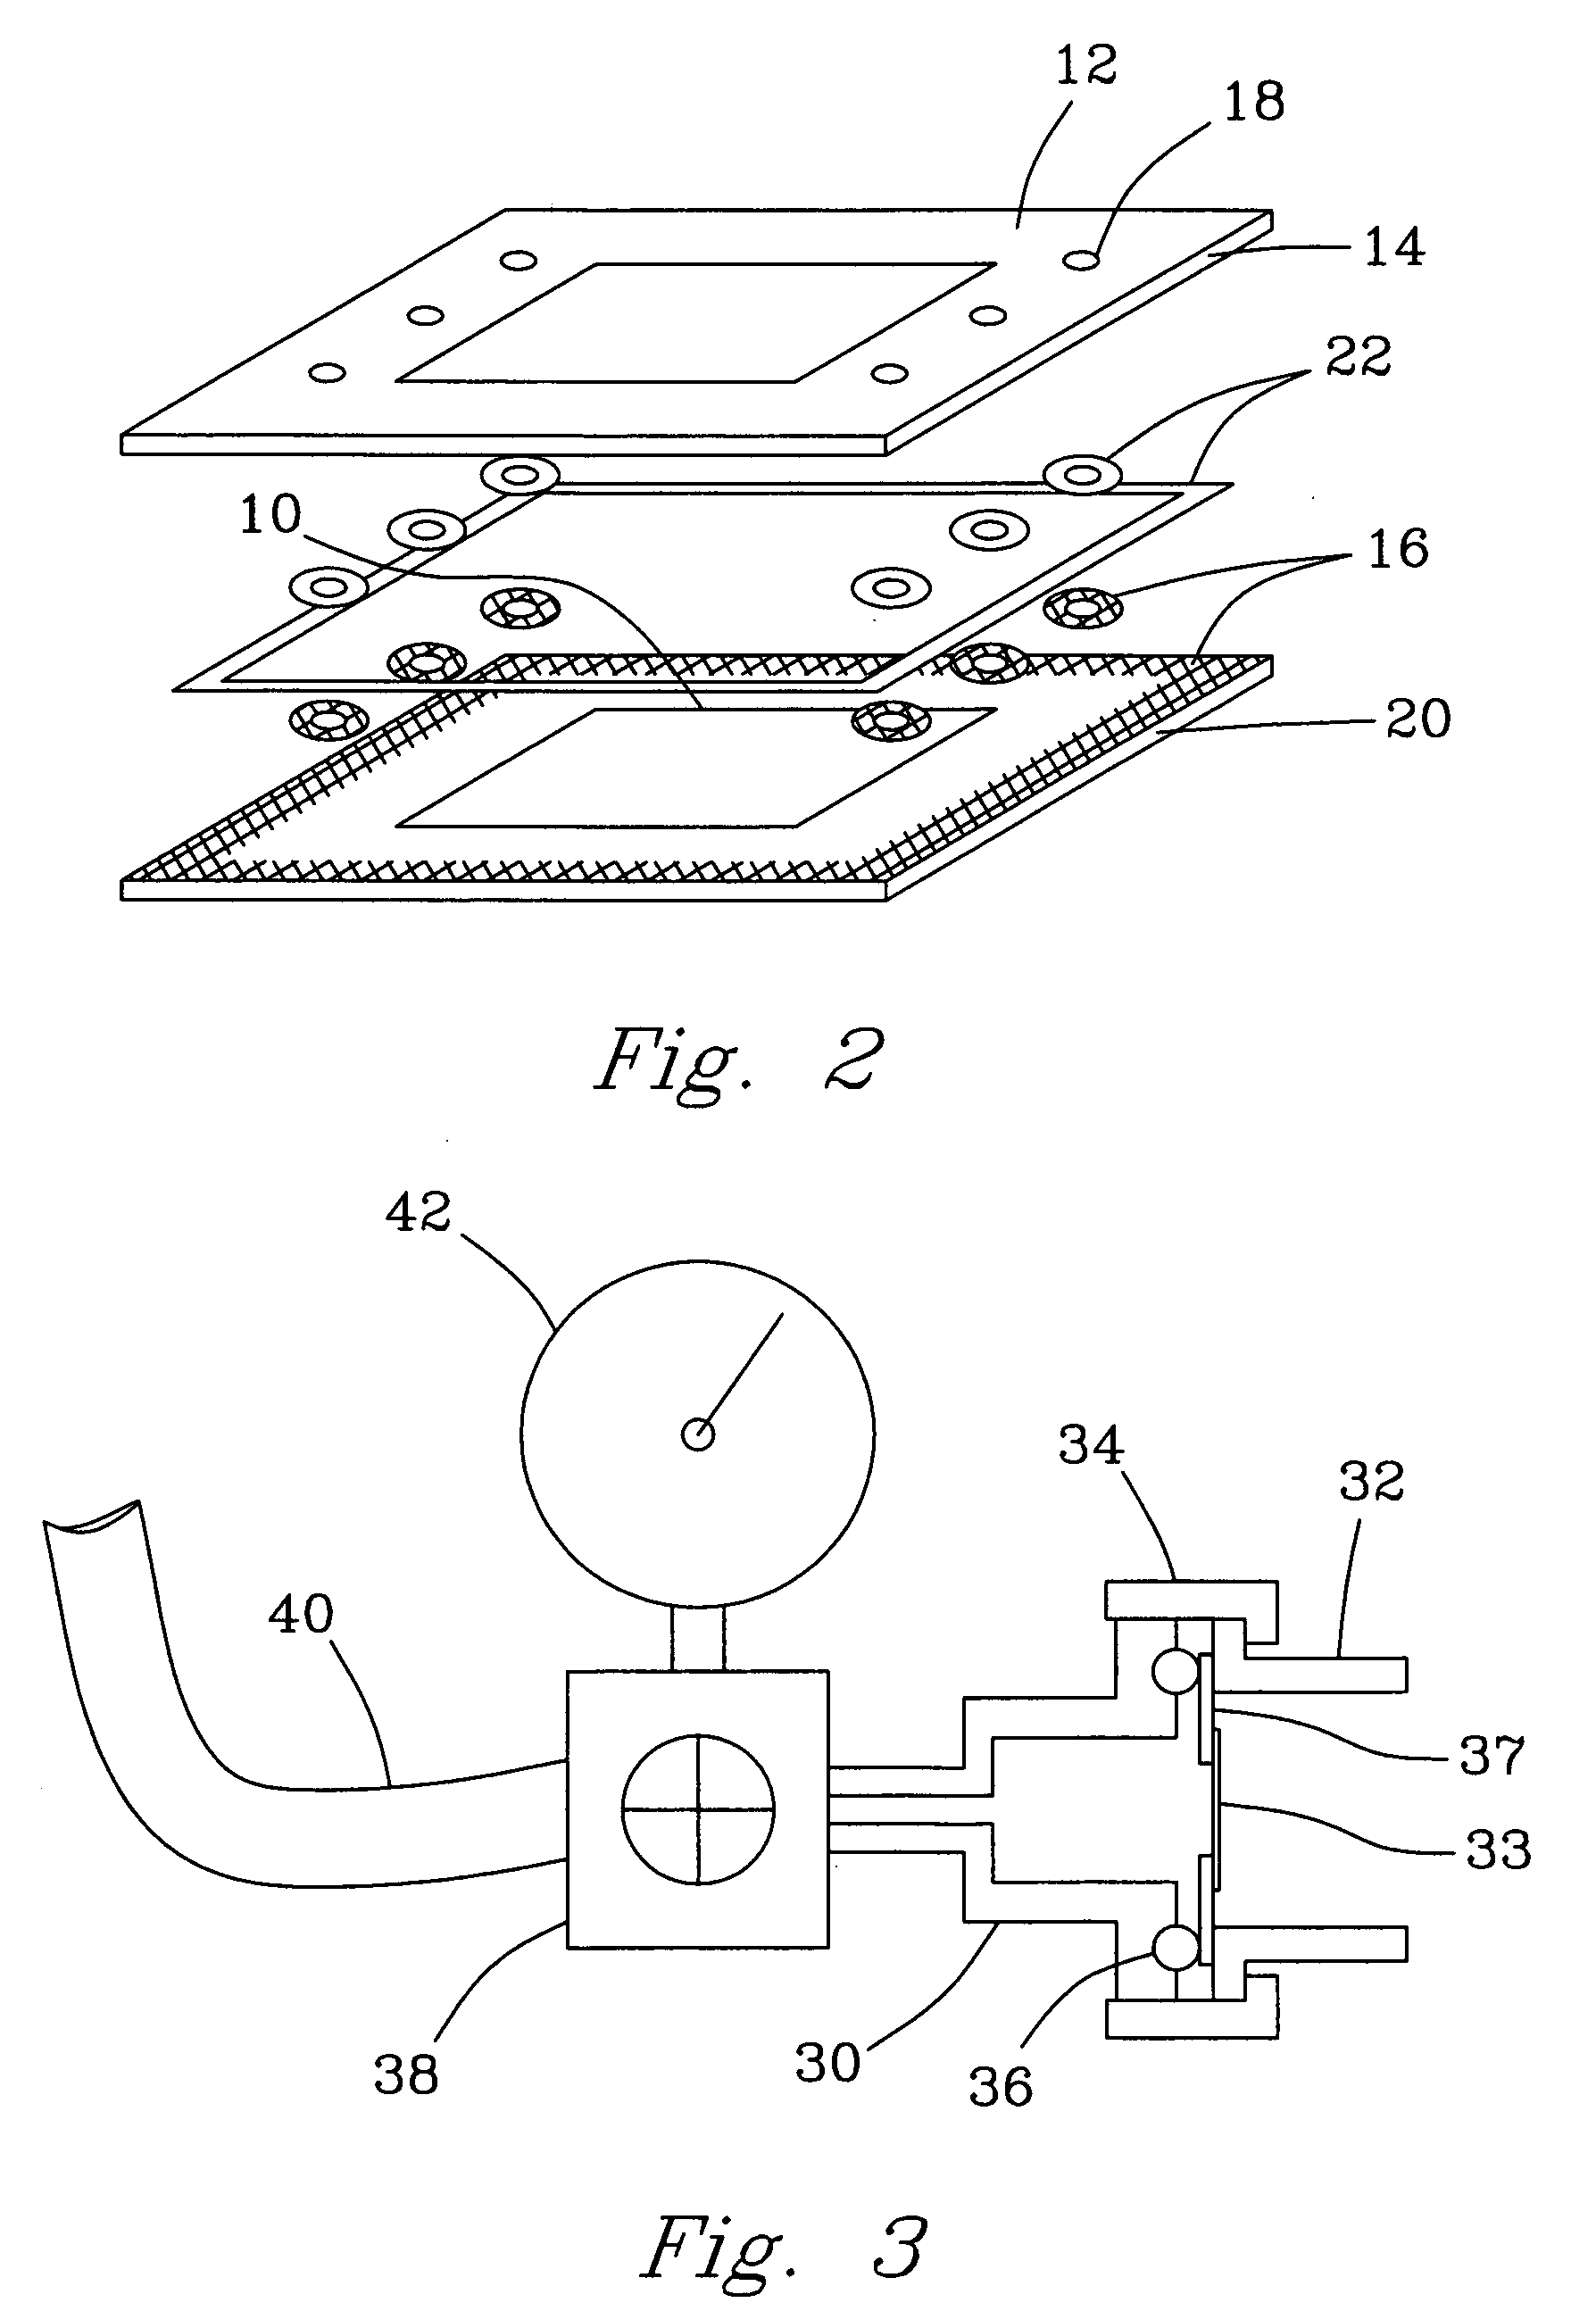 High strength insulating metal-to-metal joints for solid oxide fuel cells and other high temperature applications and method of making